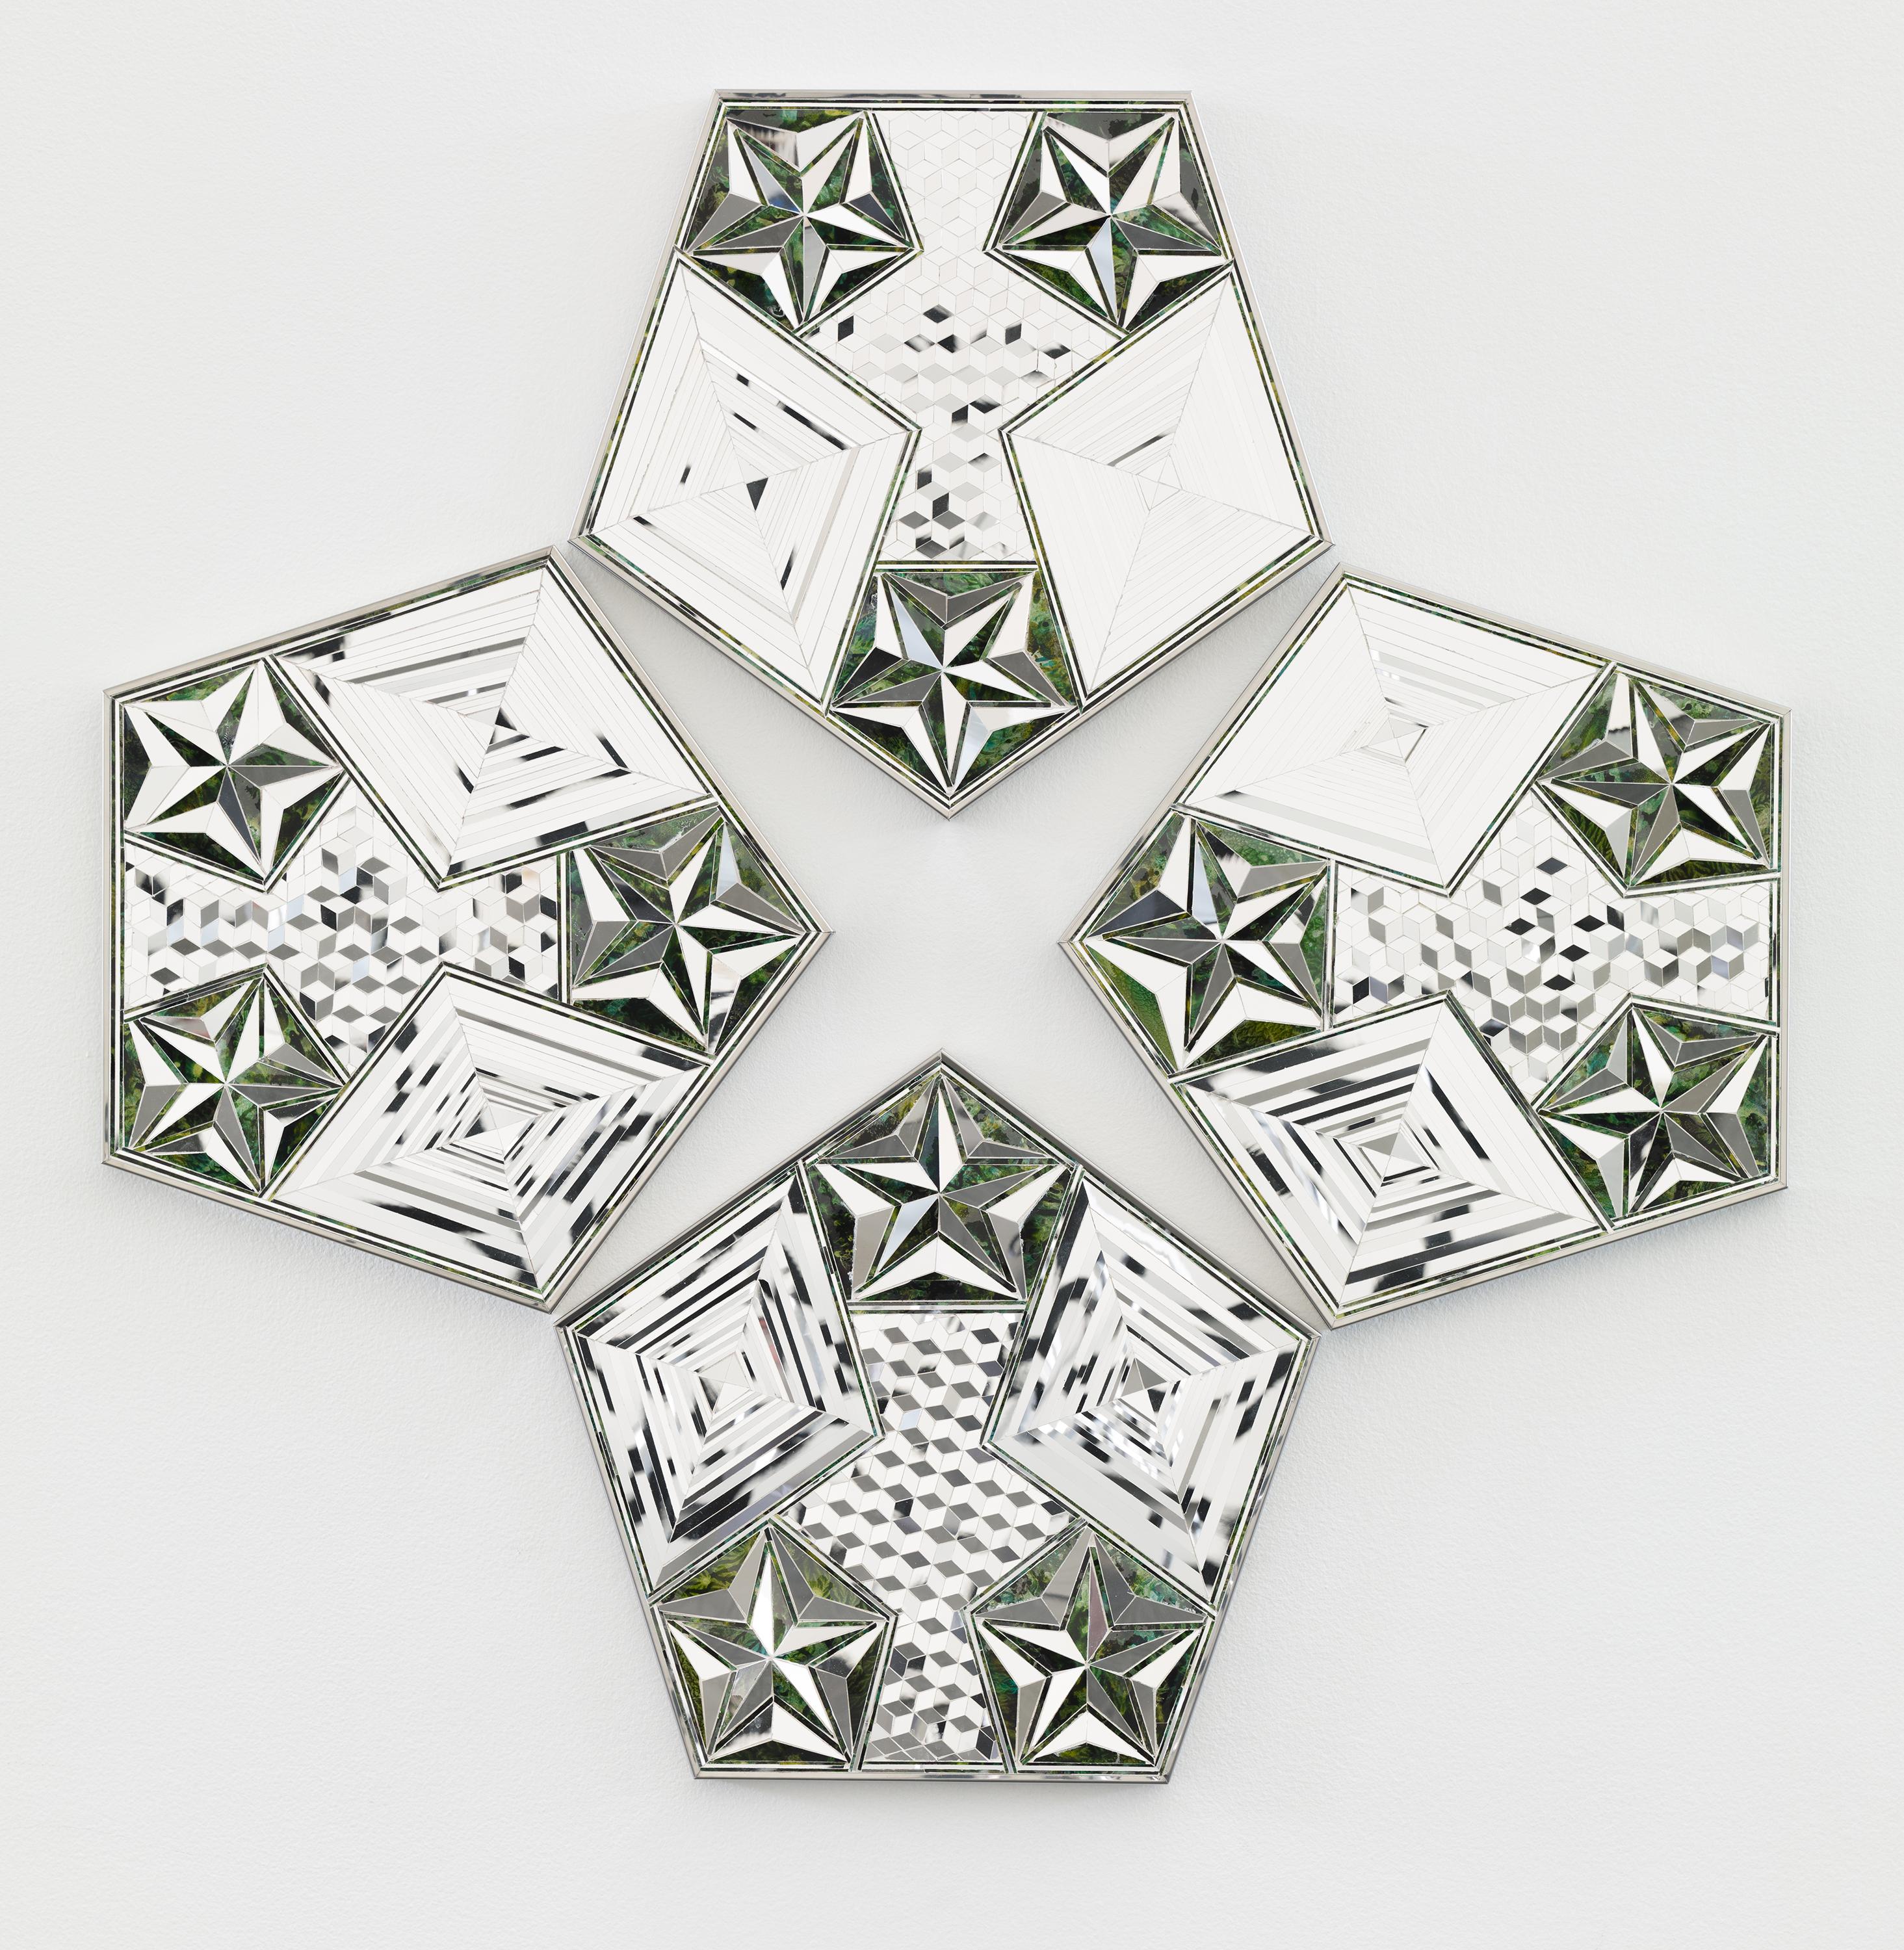 Four pentagons with geometric patterns made out of mirror shards hang on a wall.